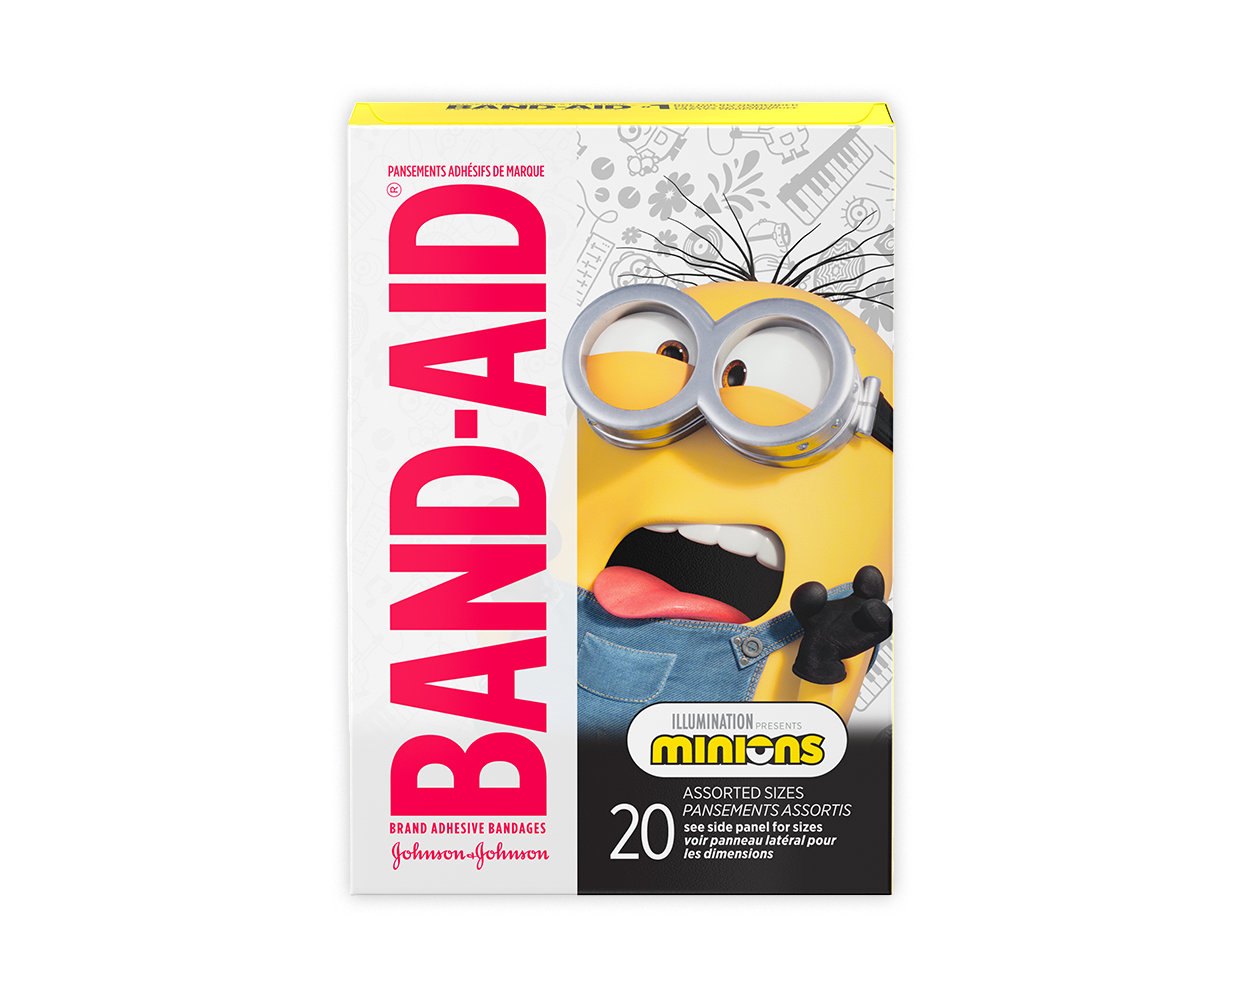 BAND-AID® Brand Adhesive Bandages featuring Minions, Assorted Sizes, 20 Count